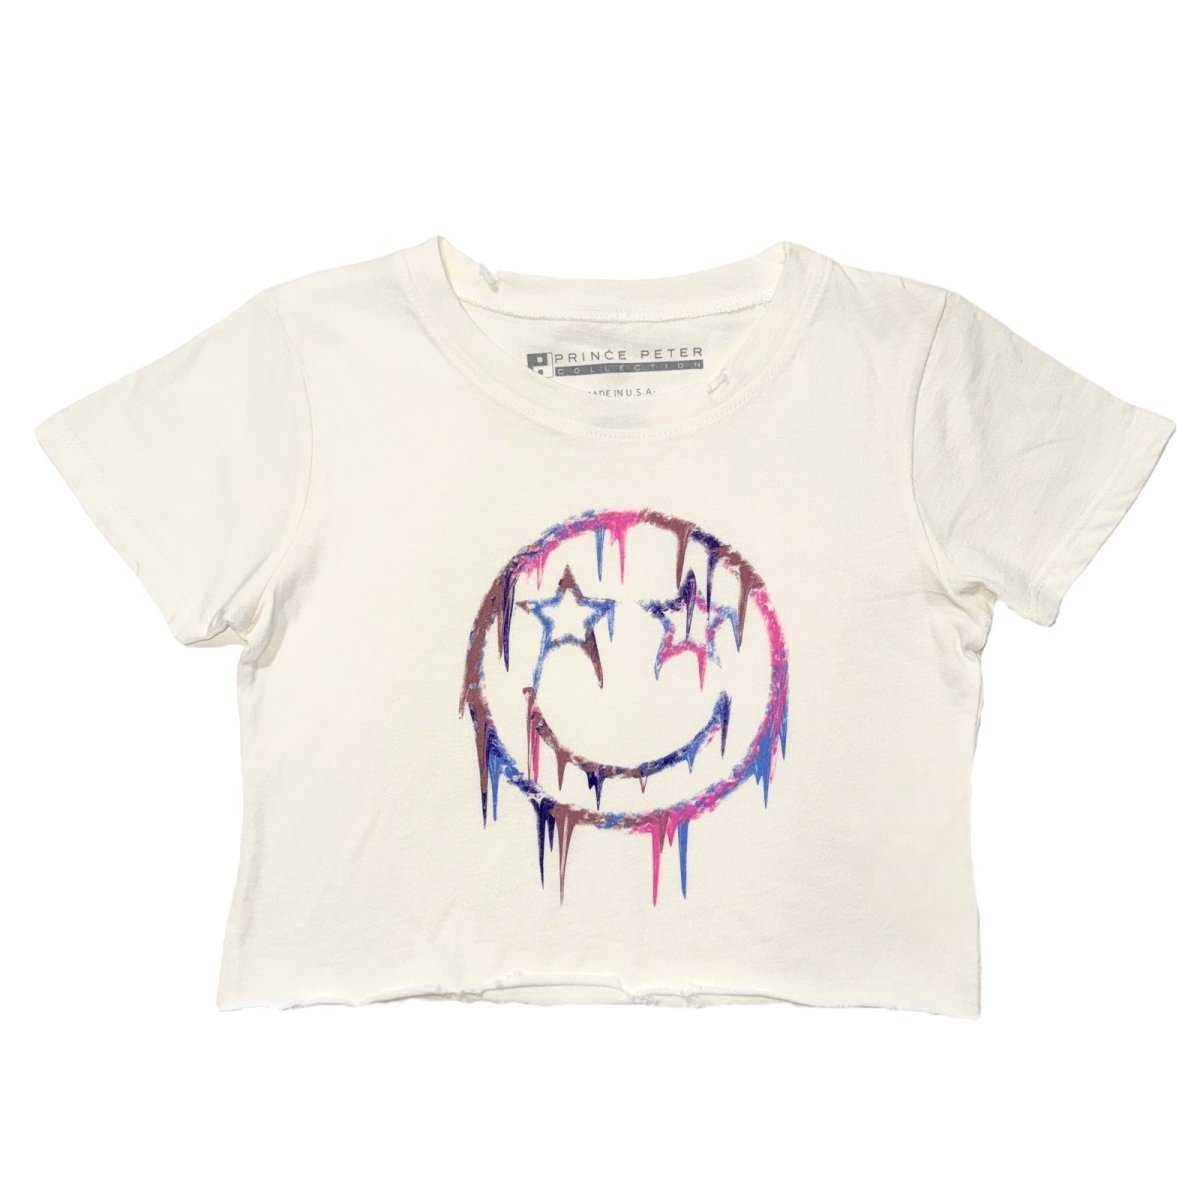 DRIPPY SMILEY FACE TSHIRT - PRINCE PETER